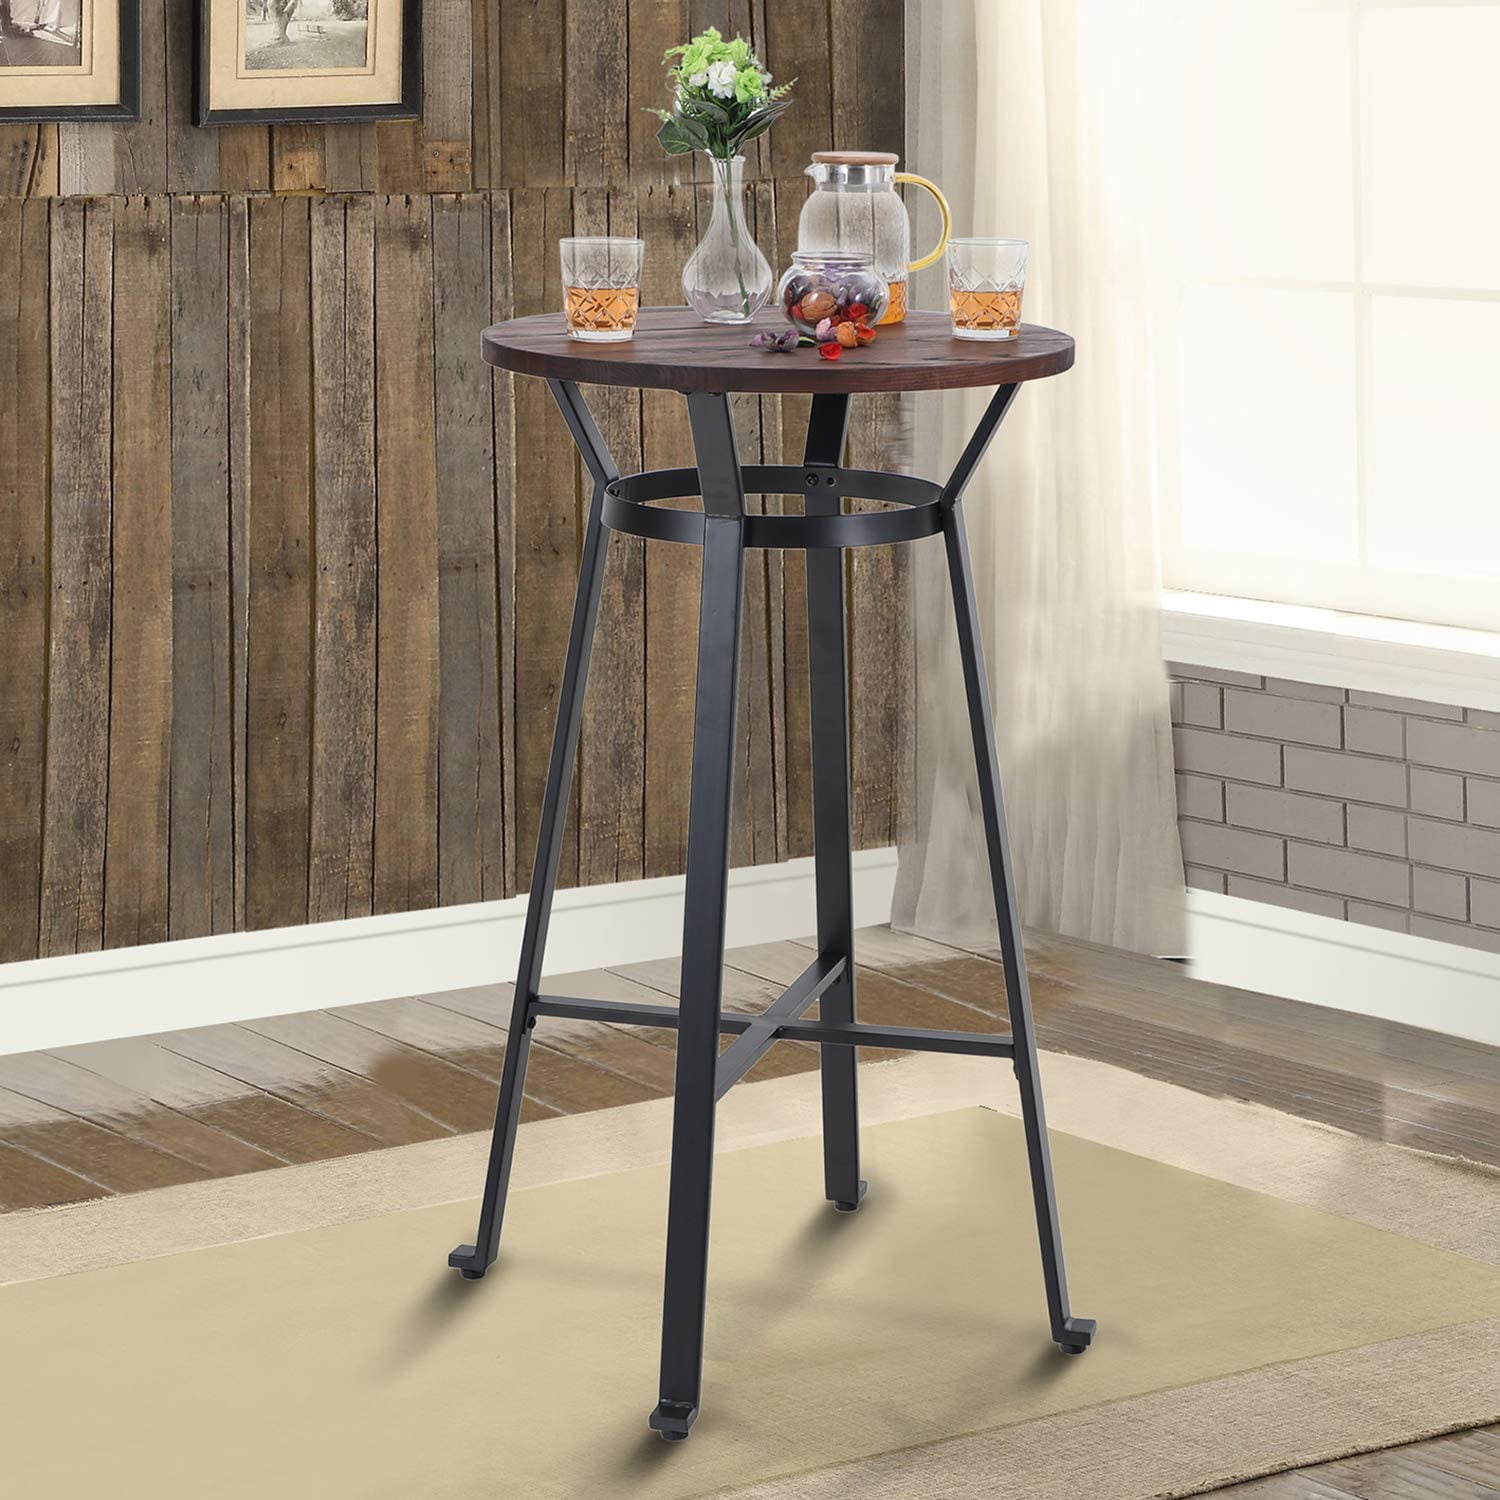 Small Bistro Table Set Indoor ~ Small Bistro Set Indoor Full Image For ...